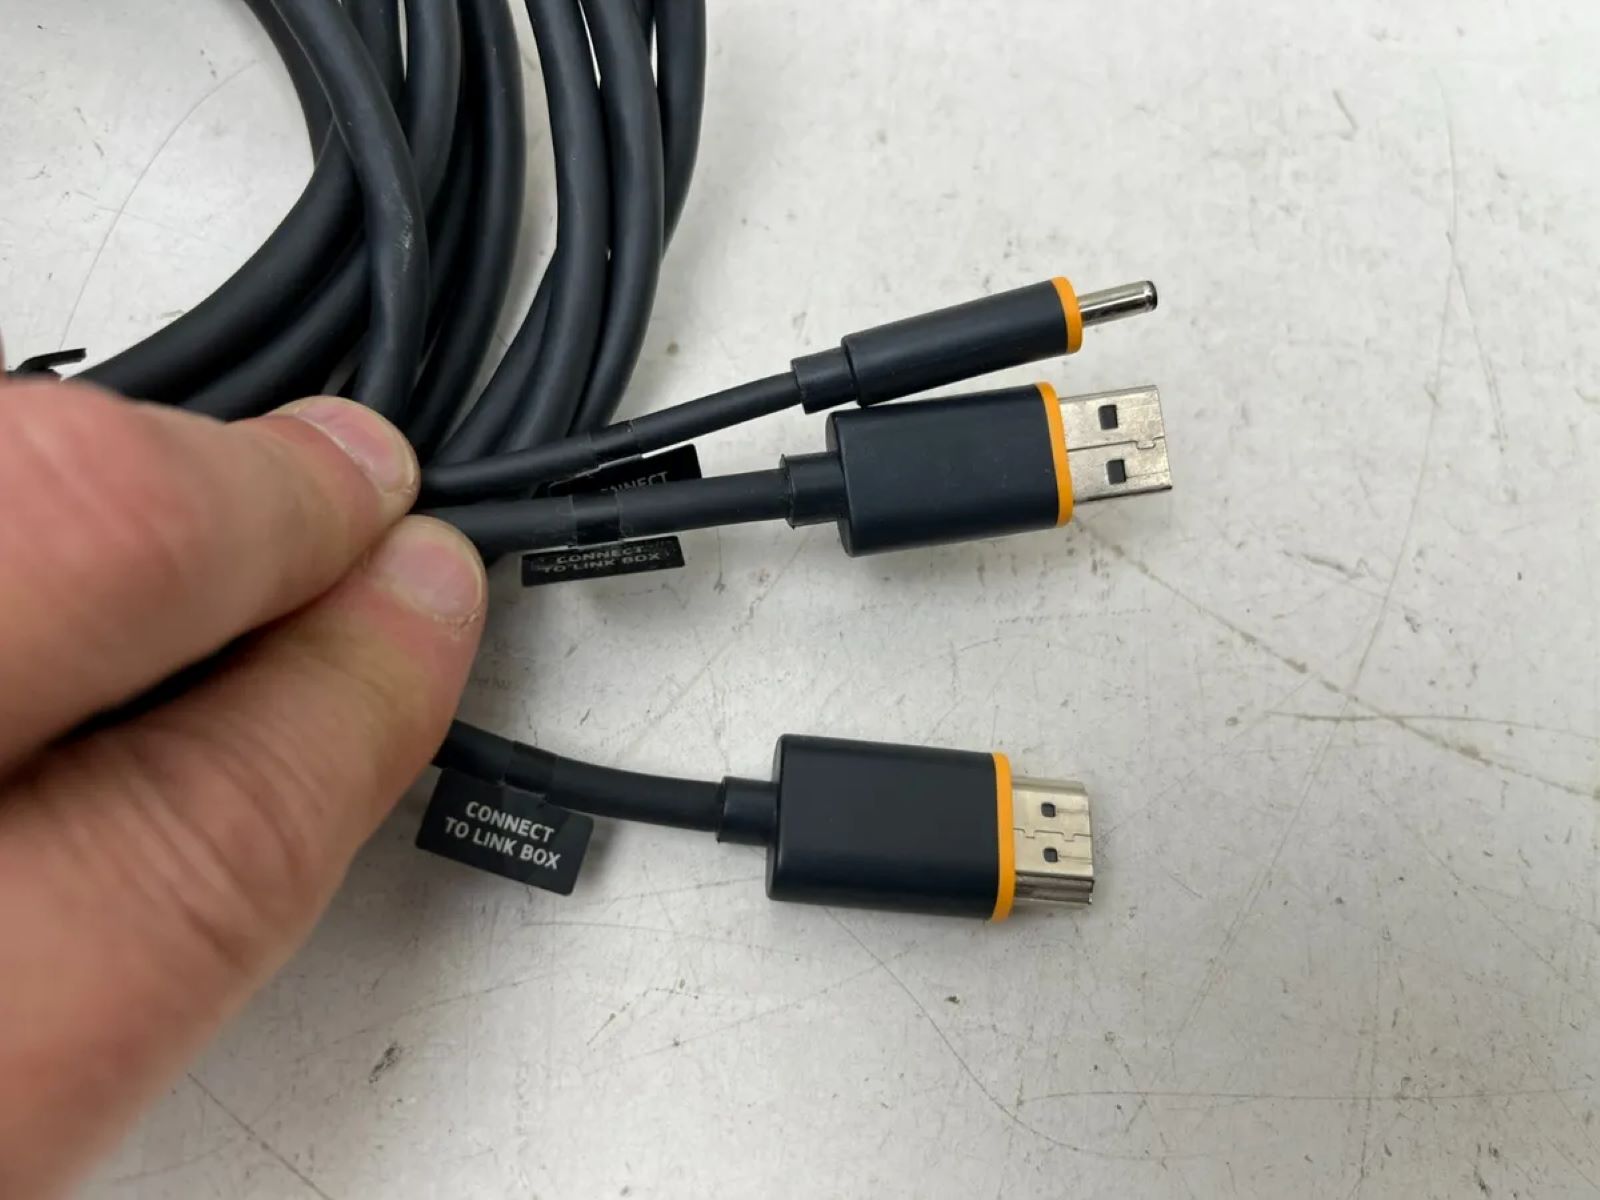 What Type Of USB Cable Does The HTC Vive Use?